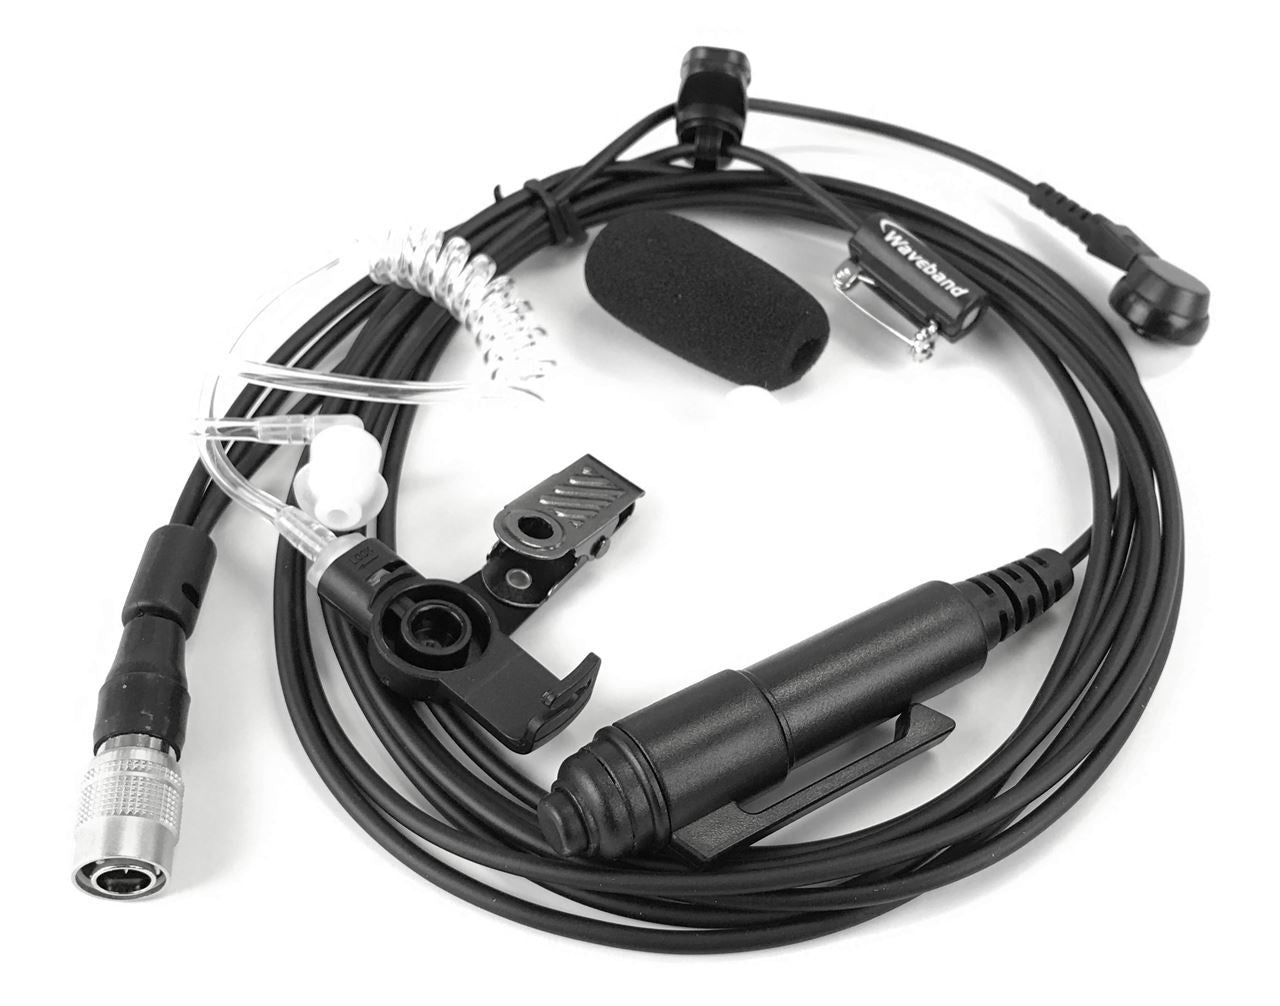 Comparable KHS-12 3 wire mini lapel mic with earphone for use with the Kenwood NX300 Portable Radio - Waveband Communications